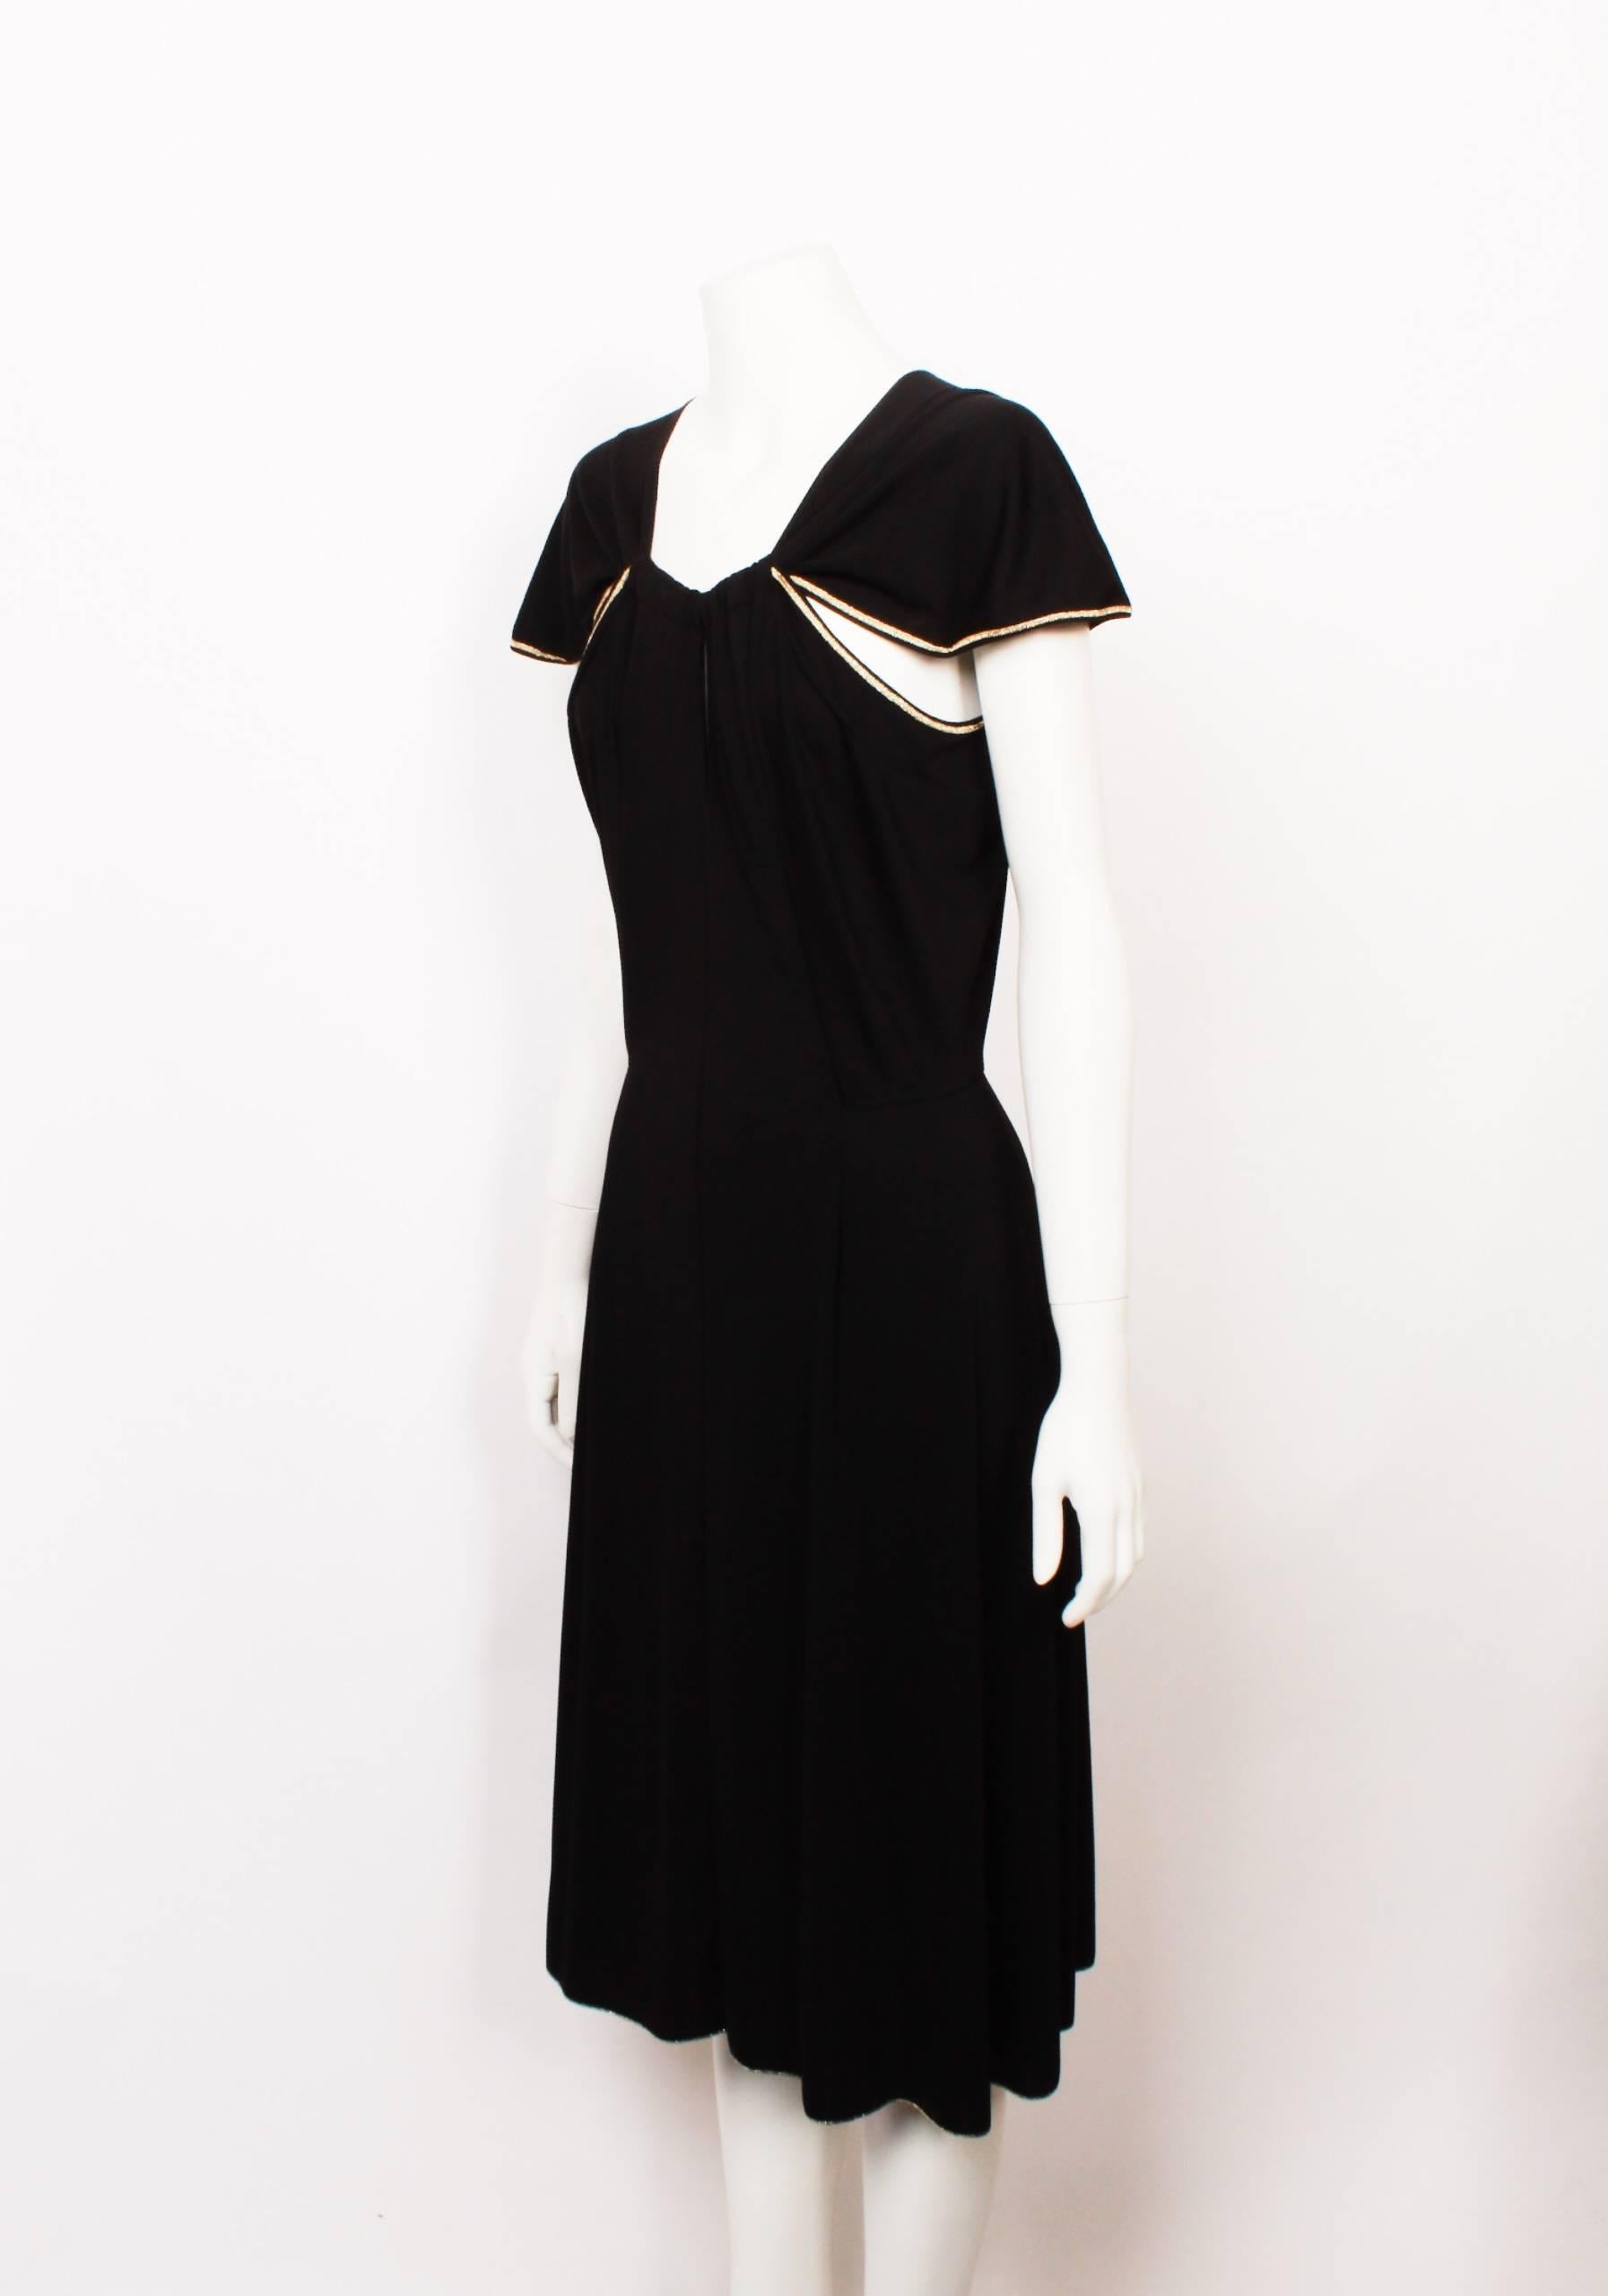 Yves Saint Laurent black fine knit jersey dress with golden satin stitch trim on all edges. From the Spring/ Summer 2011 Colection. Fitted bodice with three peek-a-boo openings and a delicate flounce petal sleeve. Flattering flared skirt silhouette.